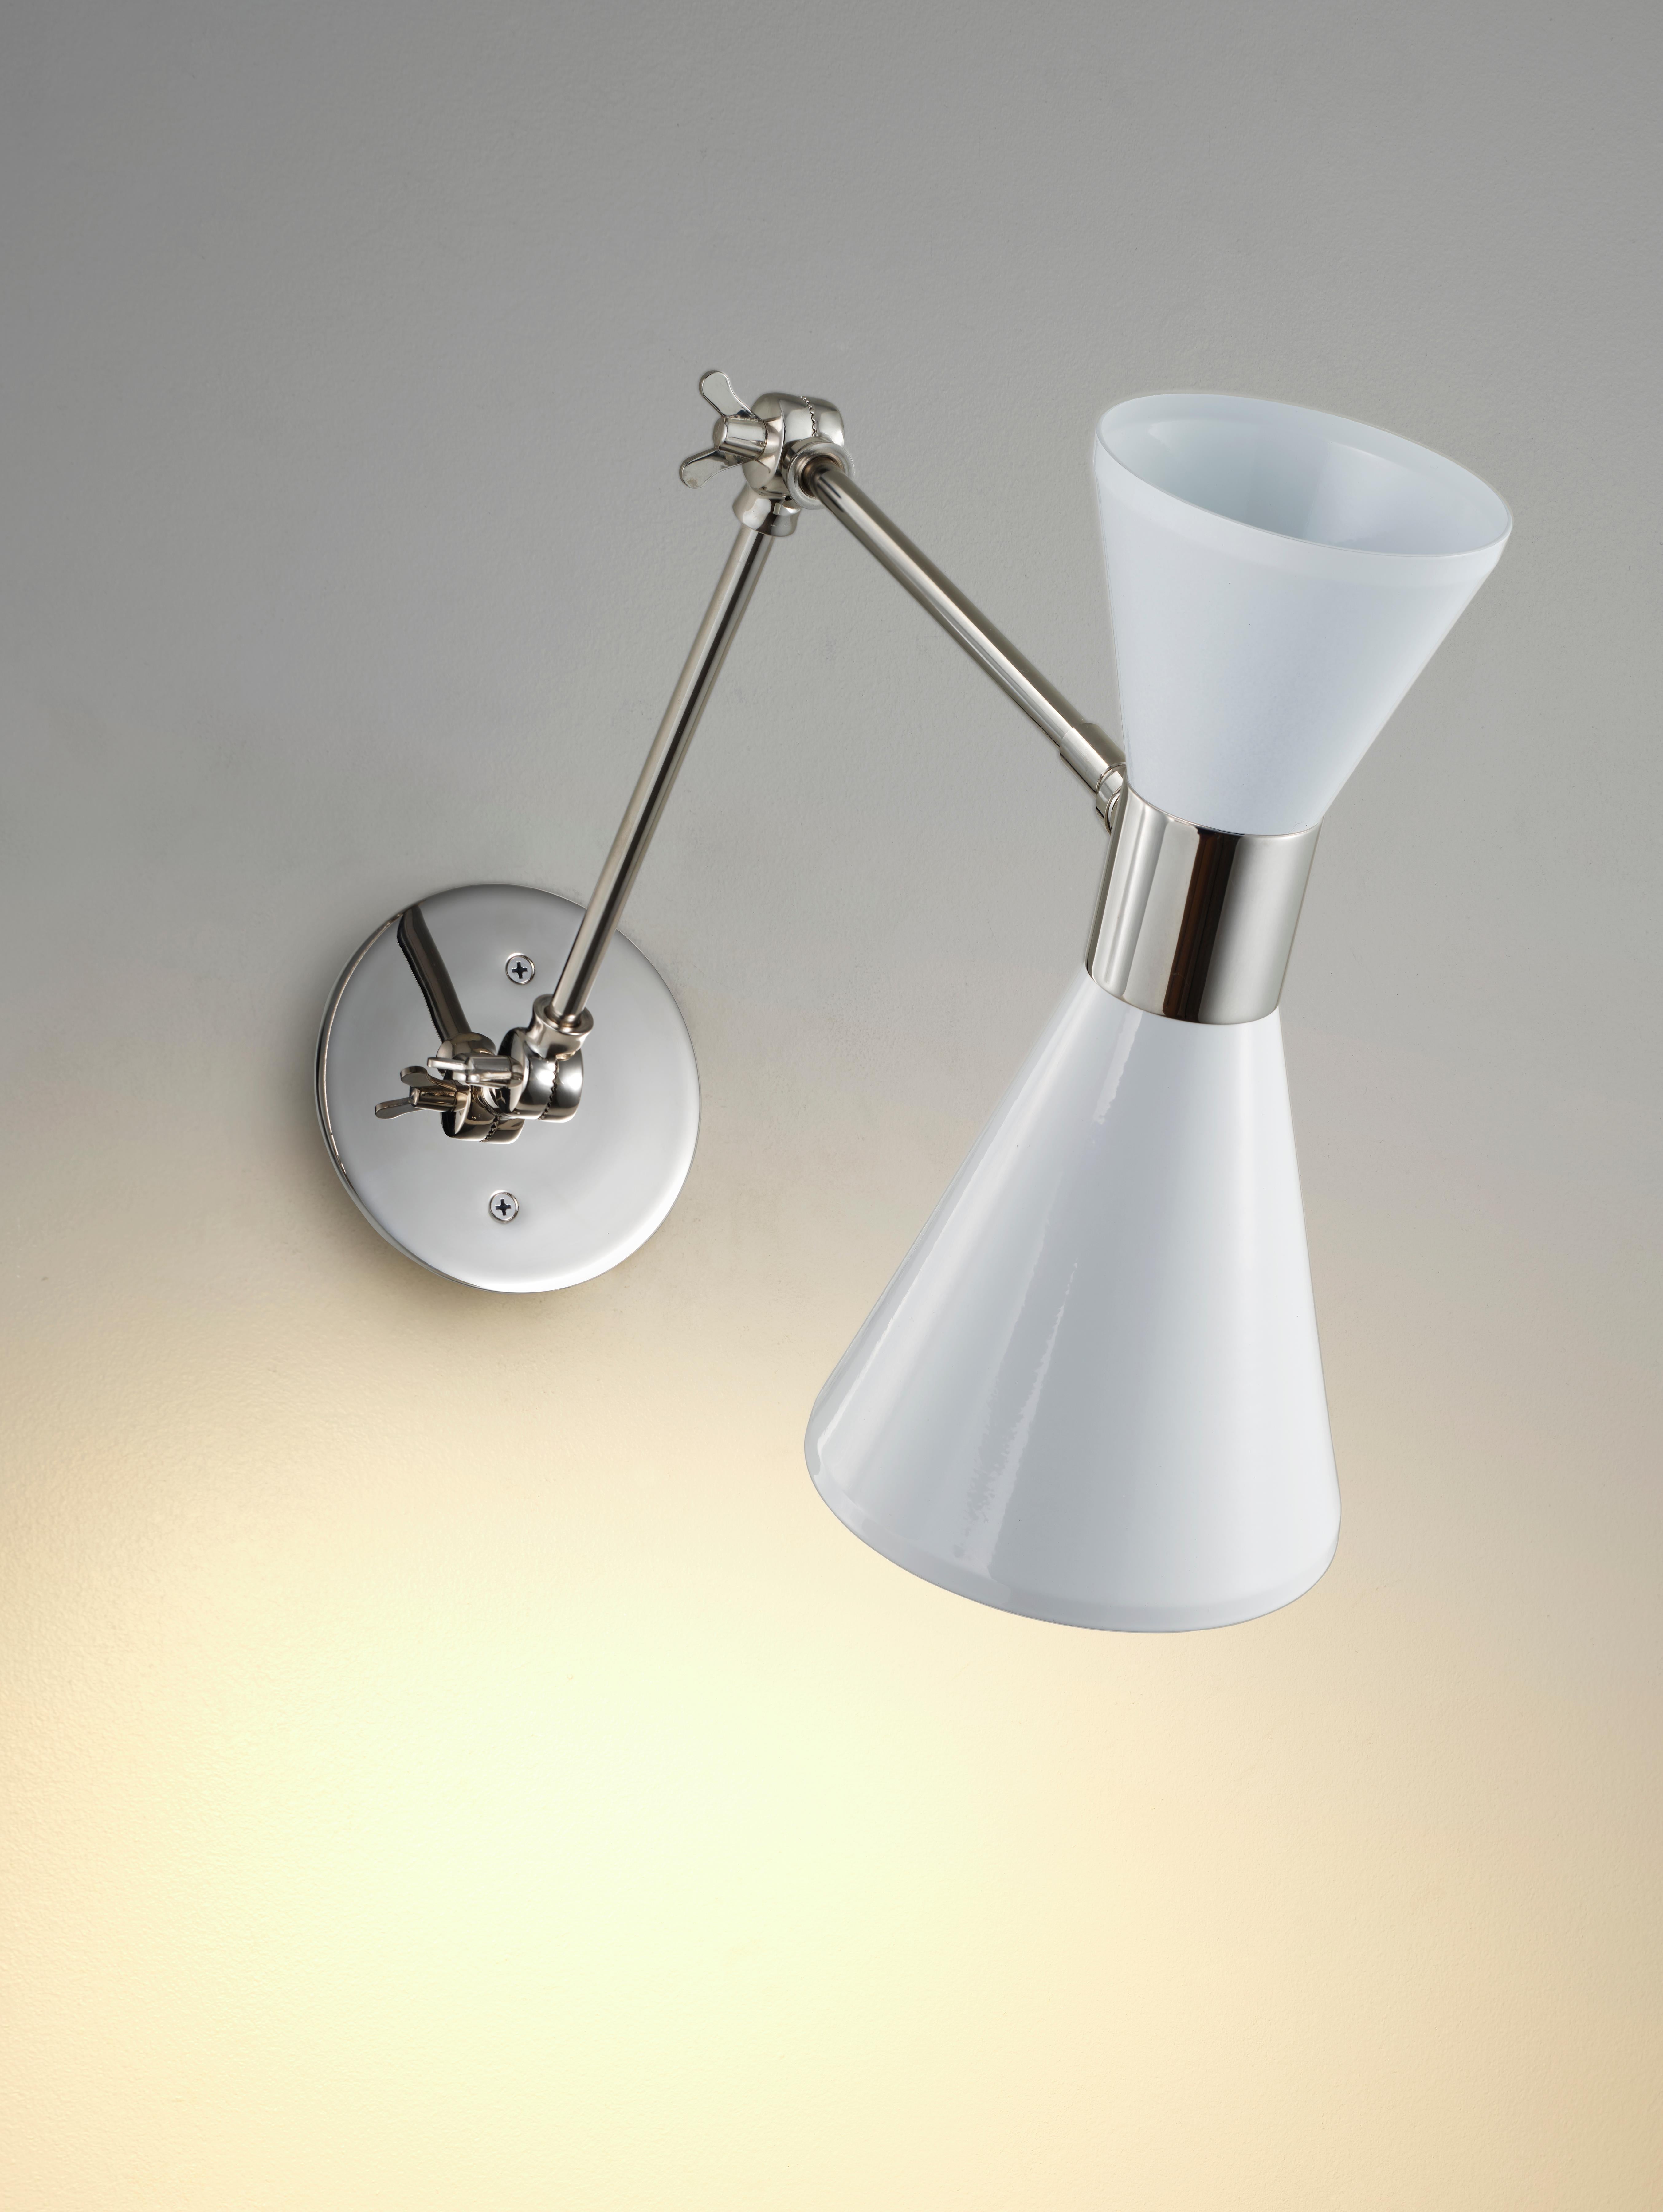 Powder-Coated CAMPANA Articulating Wall Lamp in White and Polished Nickel, Blueprint Lighting For Sale